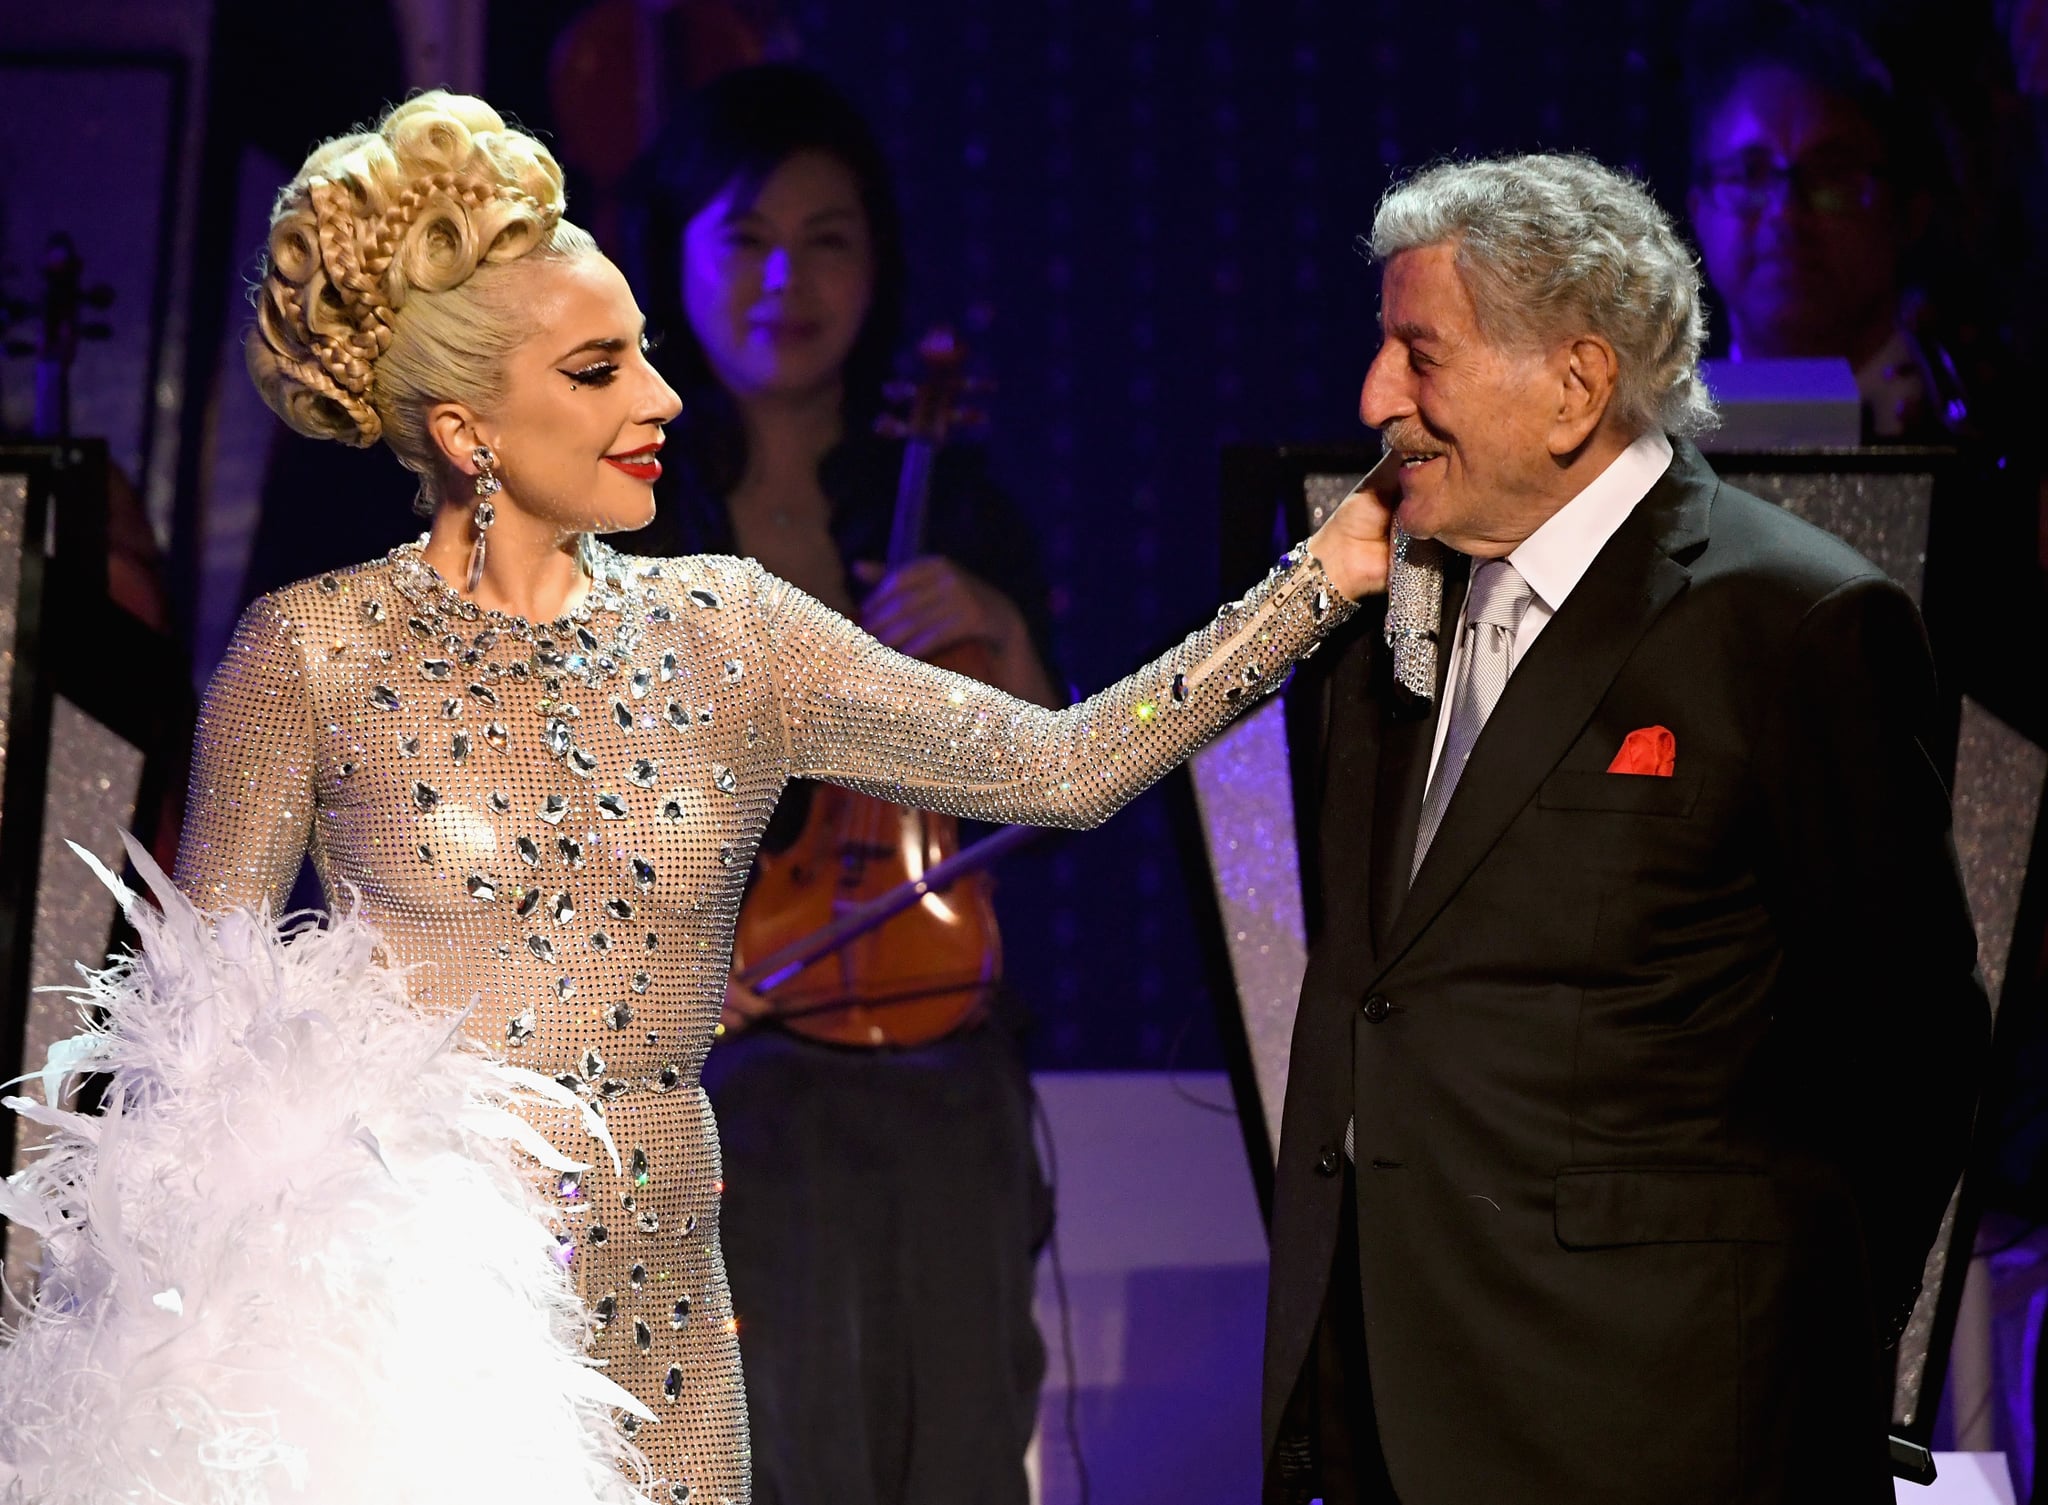 LAS VEGAS, NV - JANUARY 20:  Lady Gaga (L) performs with Tony Bennett during her 'JAZZ & PIANO' residency at Park Theater at Park MGM on January 20, 2019 in Las Vegas, Nevada.  (Photo by Kevin Mazur/Getty Images for Park MGM Las Vegas)